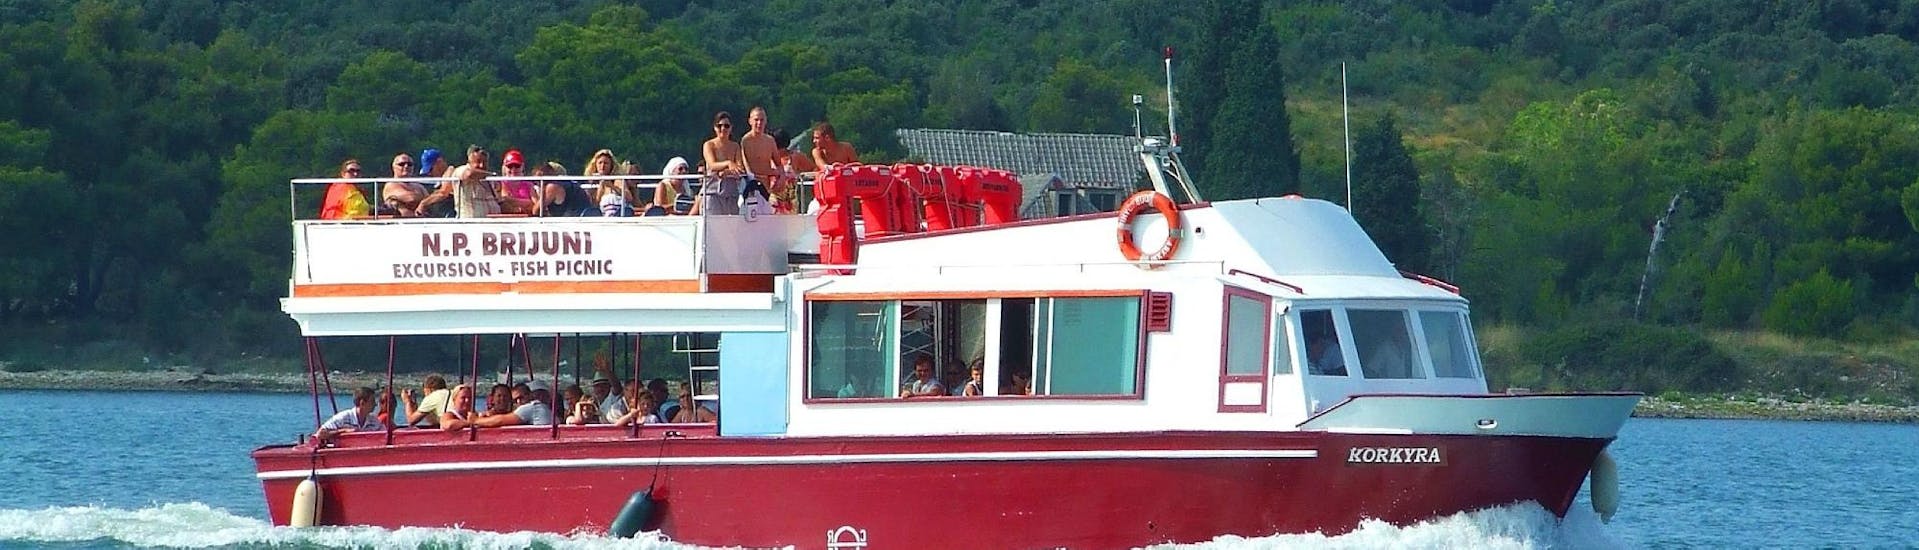 The boat during the boat trip from Pula to Brijuni National Park hosted by Korkyra Tour Pula.